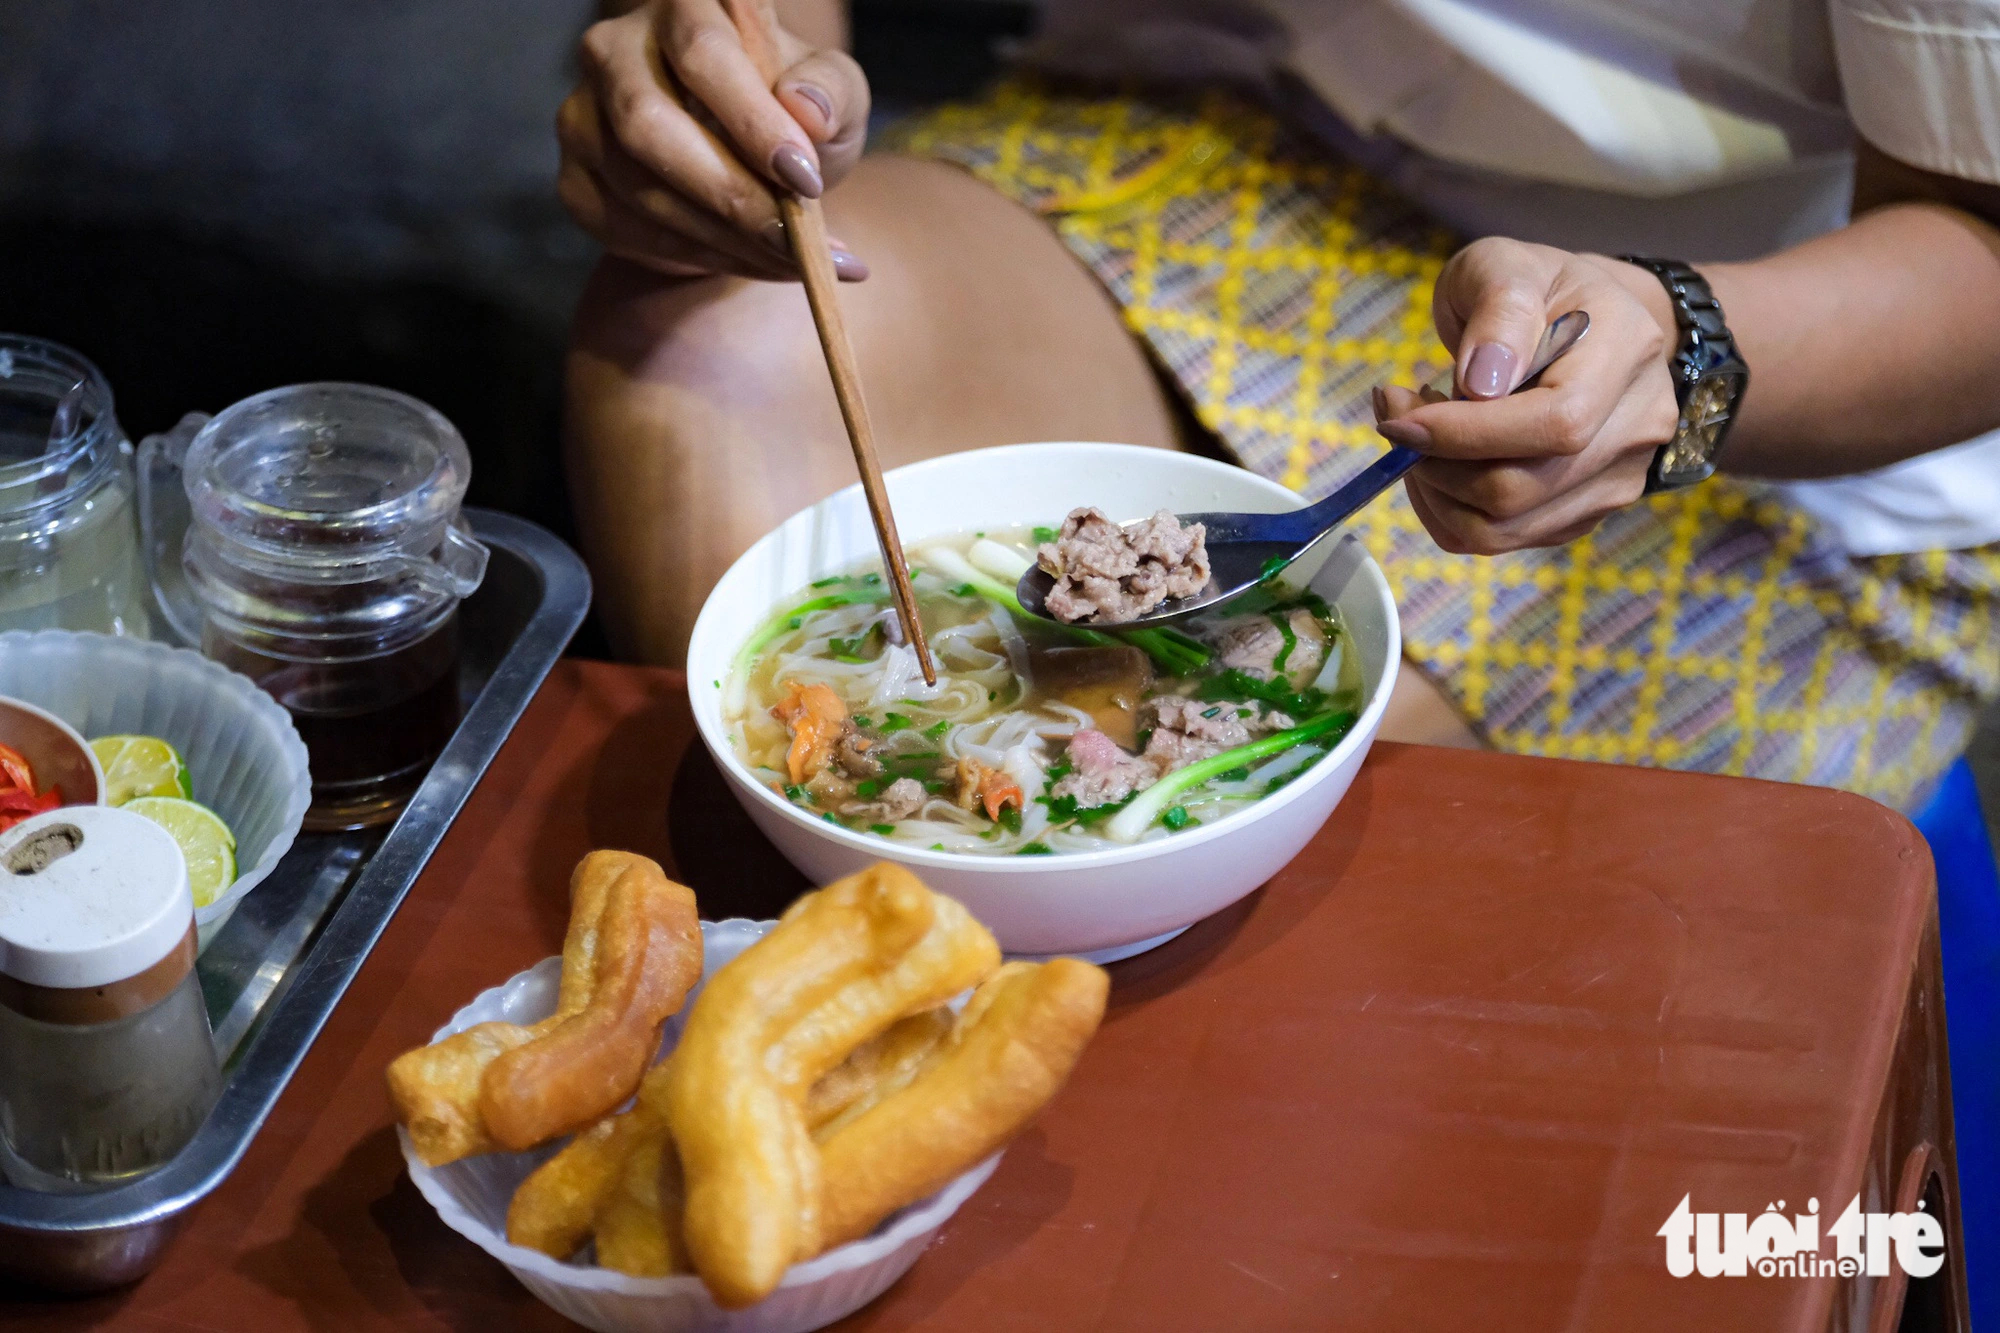 A diner enjoys a bowl of phở (beef/chicken noodle soup), one of Vietnam’s specialties. Photo: Nam Tran / Tuoi Tre